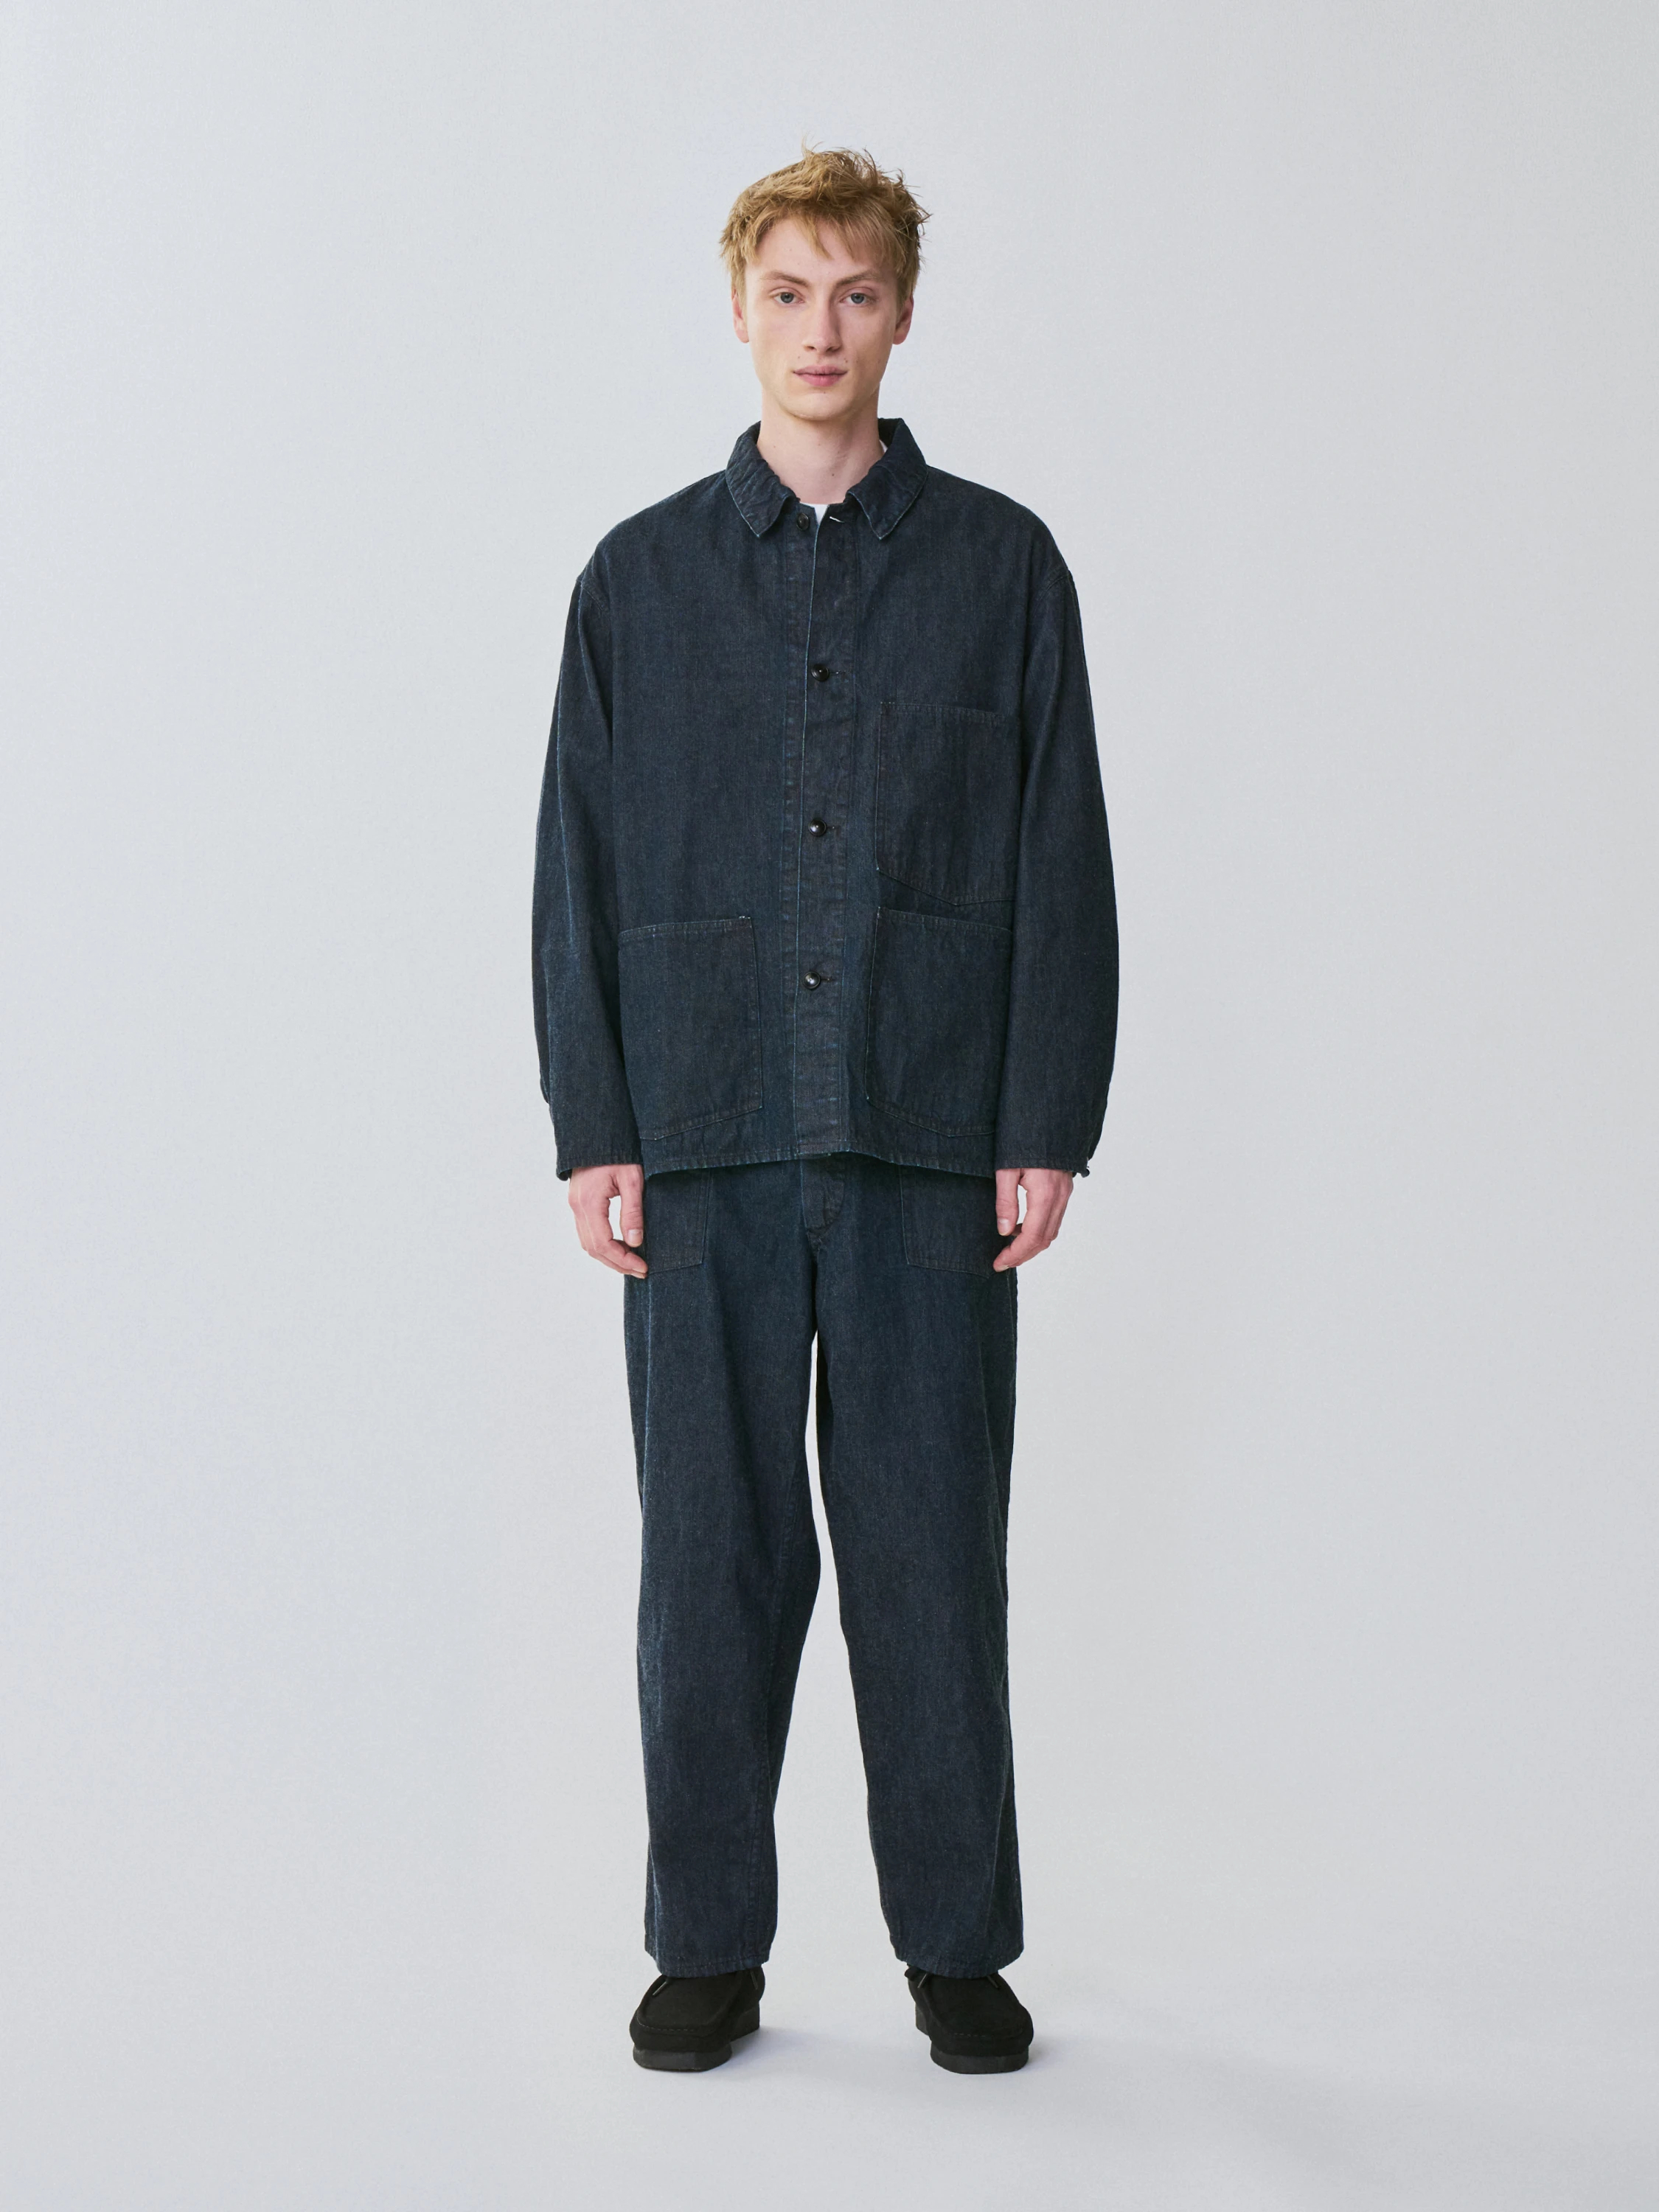 Coverall Jacket | OUTER WEAR | KAPTAIN SUNSHINE ONLINE STORE